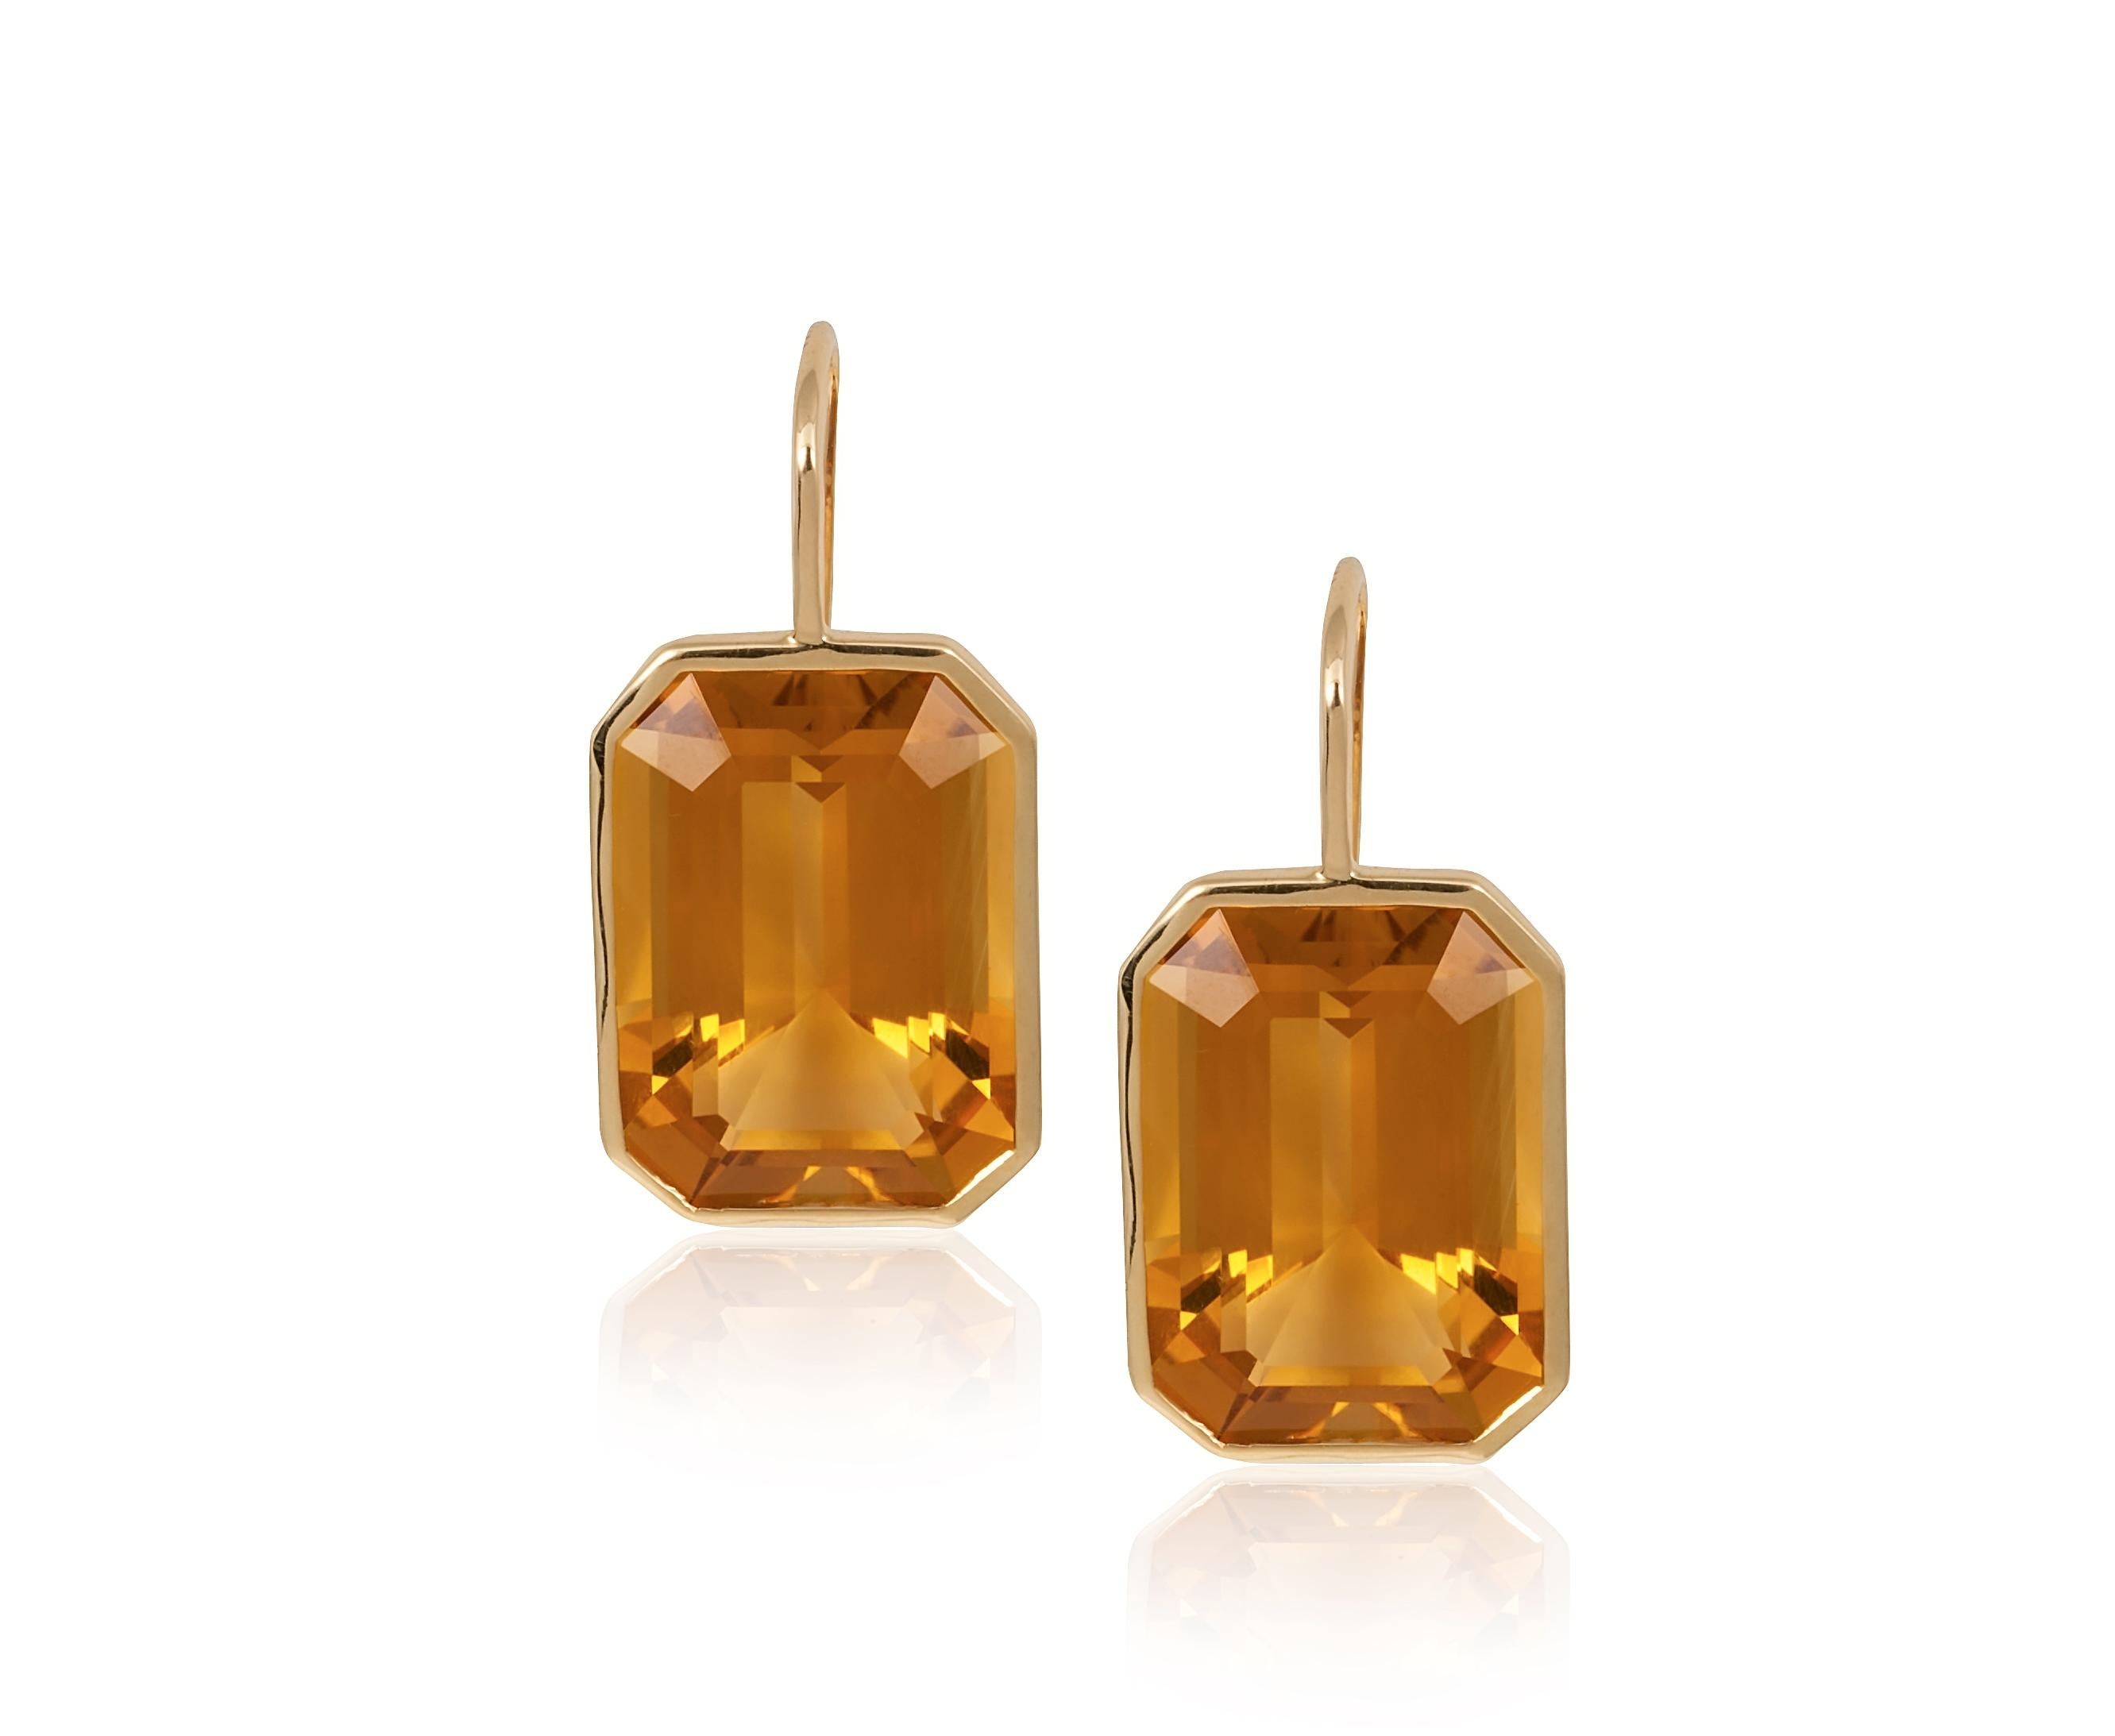 These Citrine Emerald Cut Earrings on Wire in 18K Yellow Gold are a stunning piece of jewelry from the 'Gossip' Collection. These earrings feature beautifully cut citrine stones set in 18K yellow gold wire, which elegantly hangs from the earlobe.